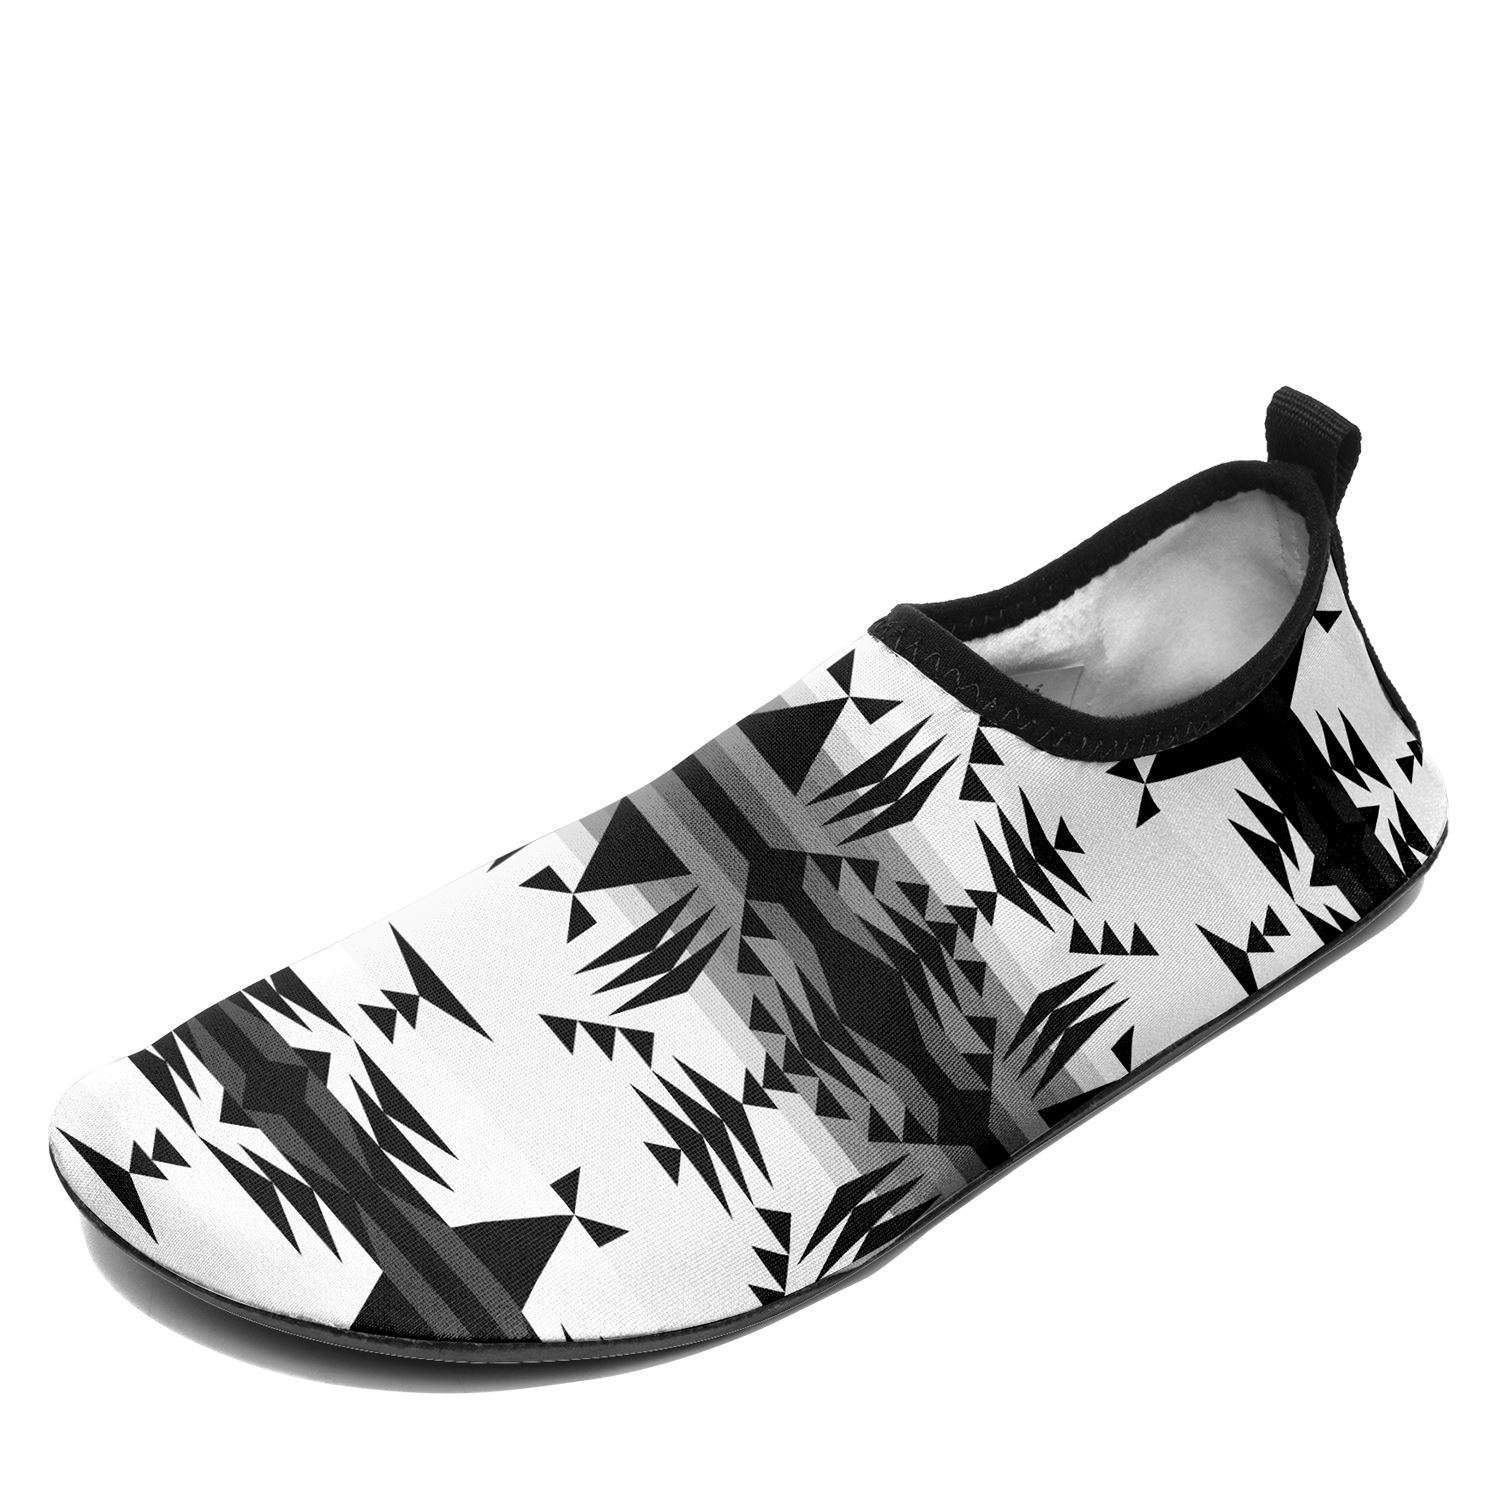 Between the Mountains White and Black Sockamoccs Kid's Slip On Shoes 49 Dzine 